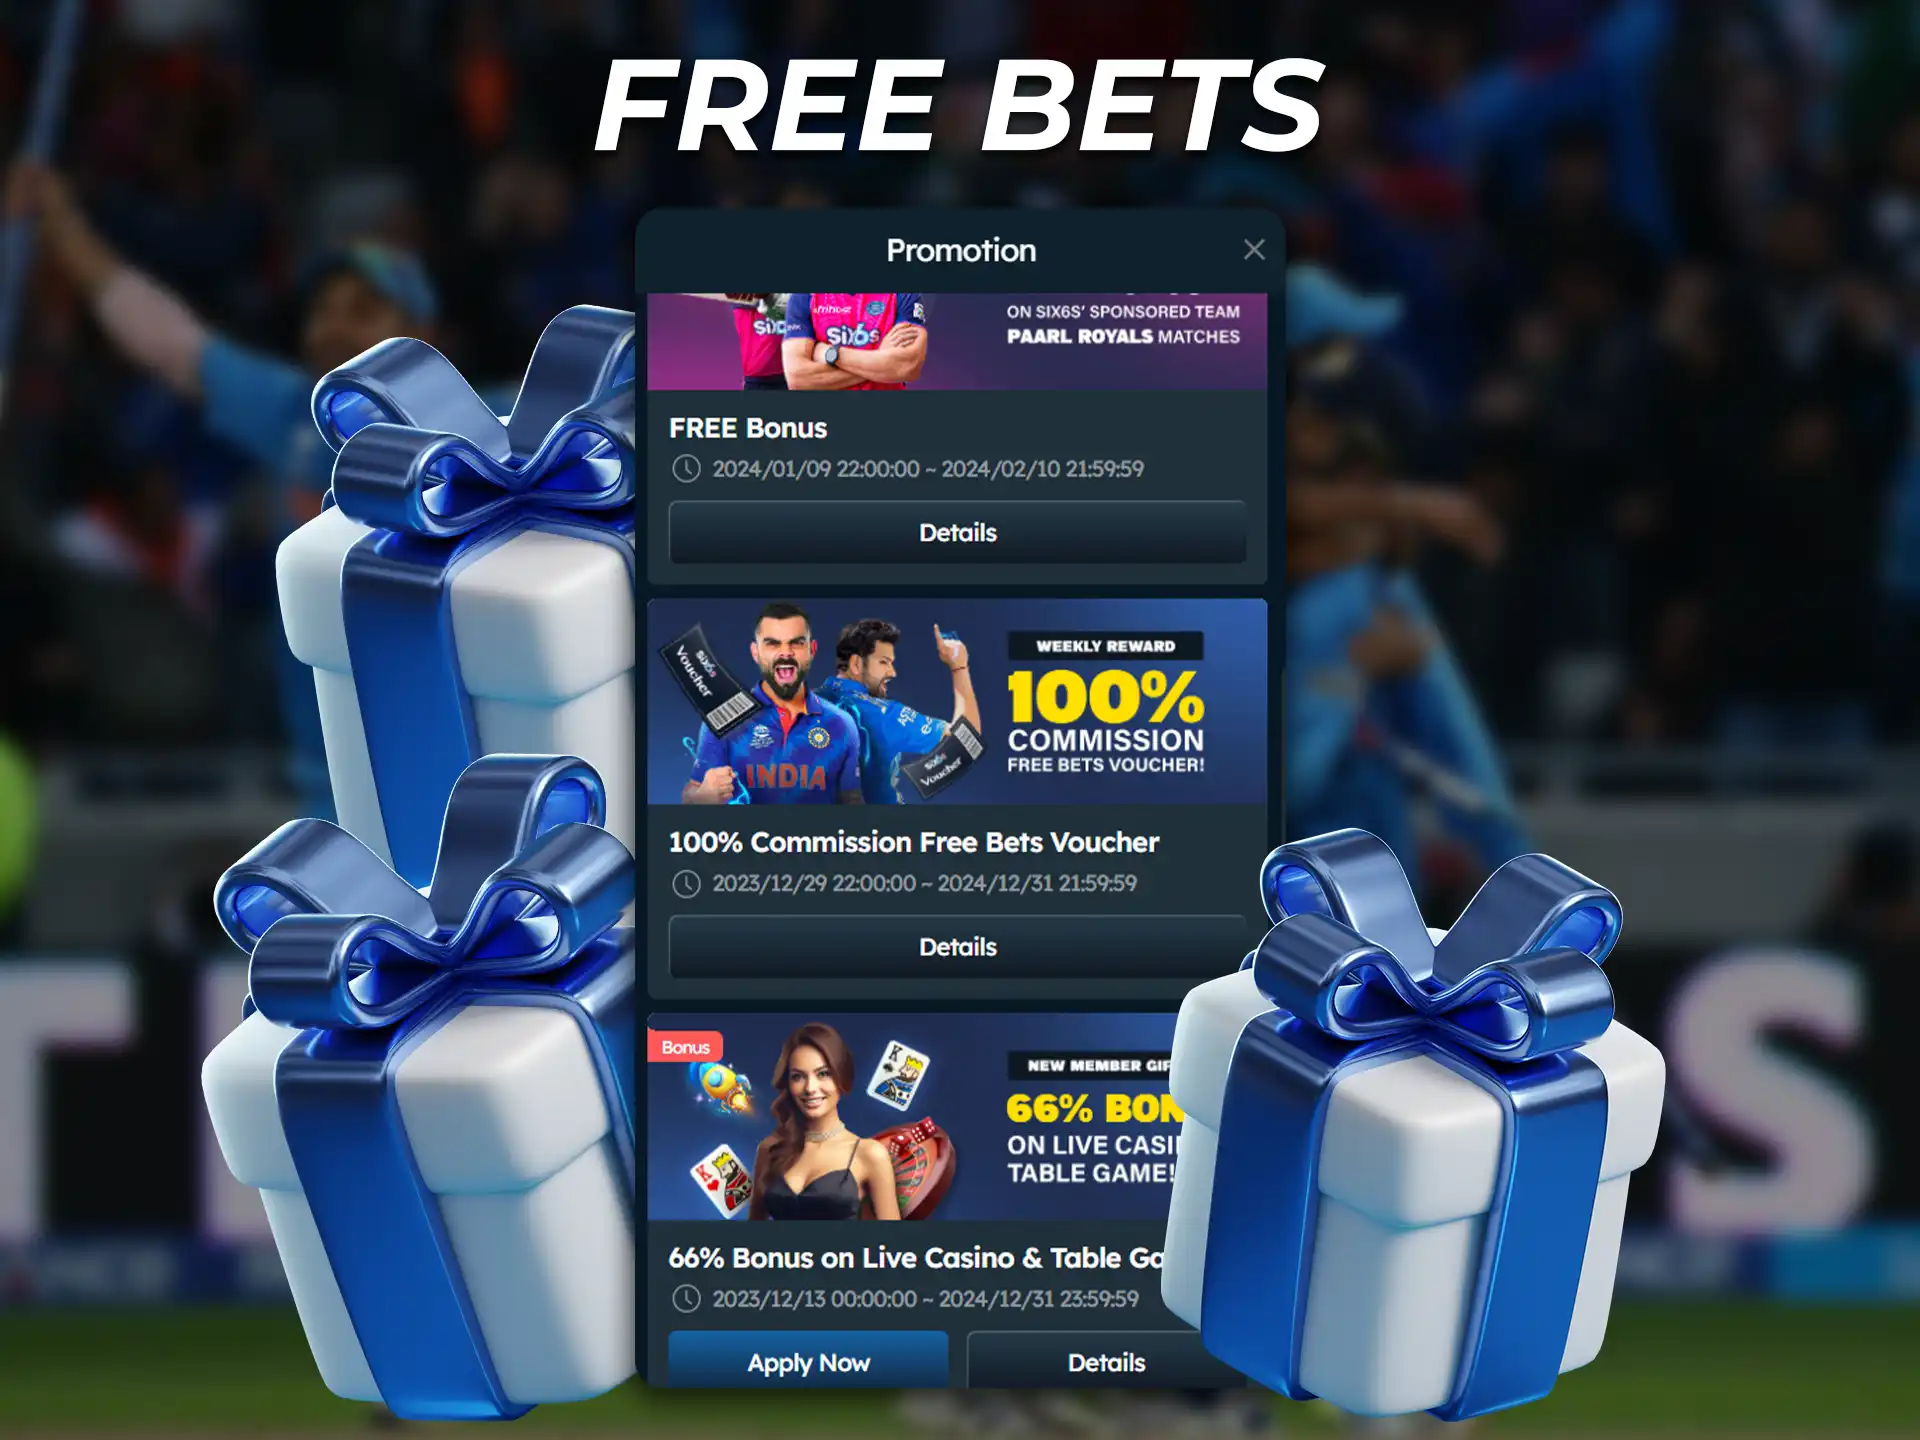 Free bets are a popular type of bonus at new bookmakers.